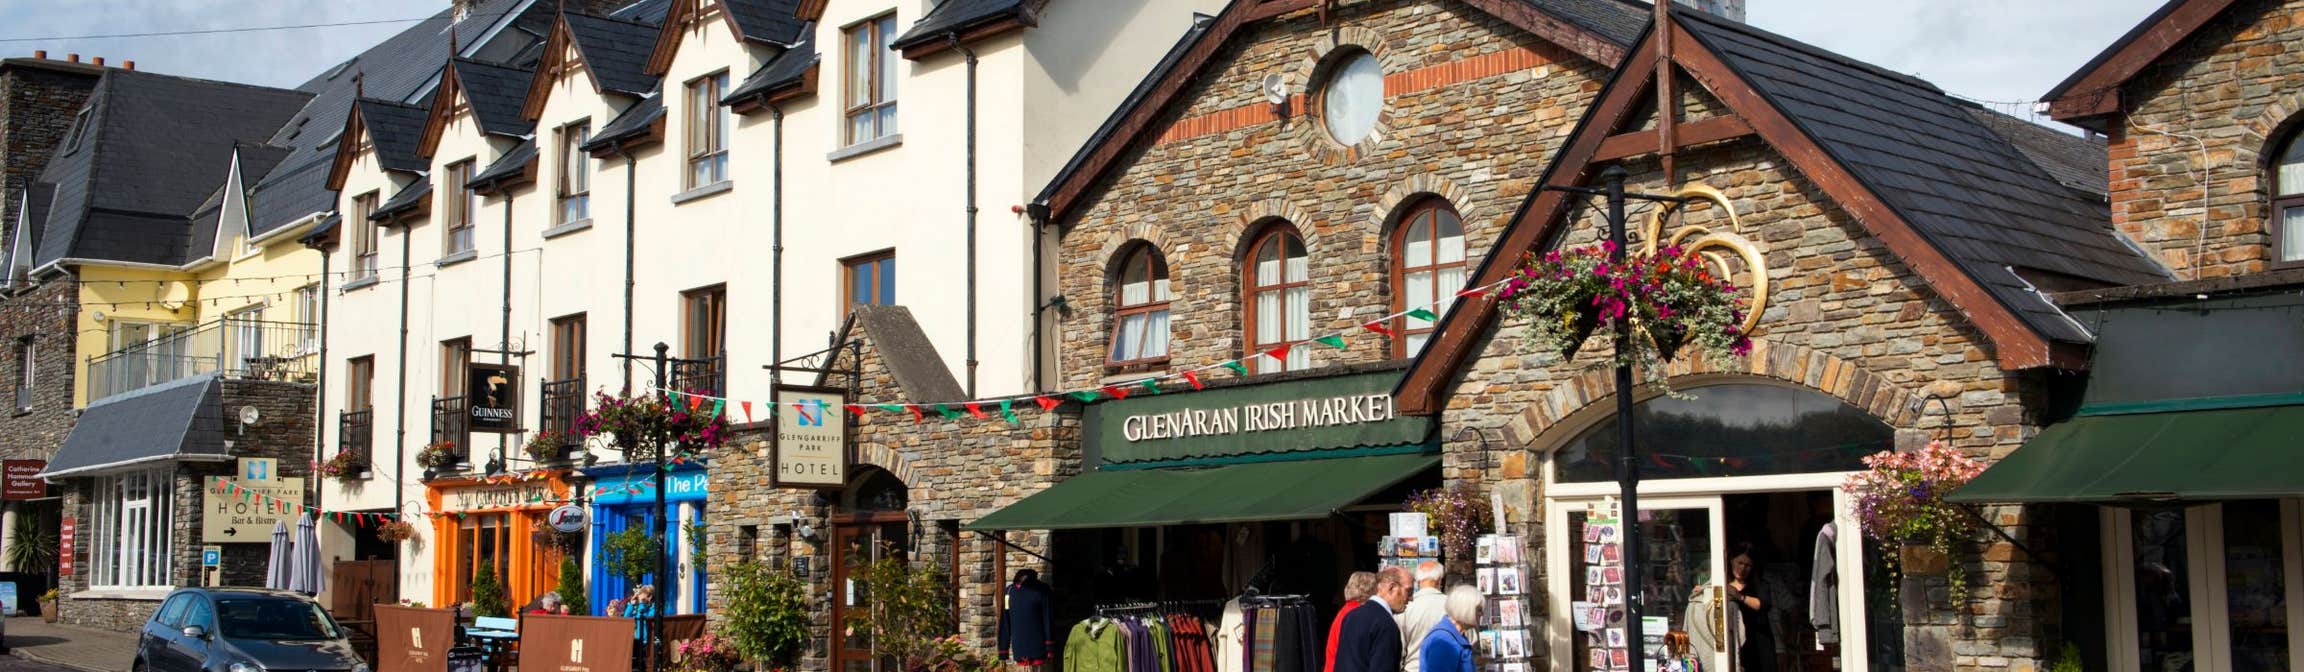 Image of shopfronts in Glengarriff in County Cork